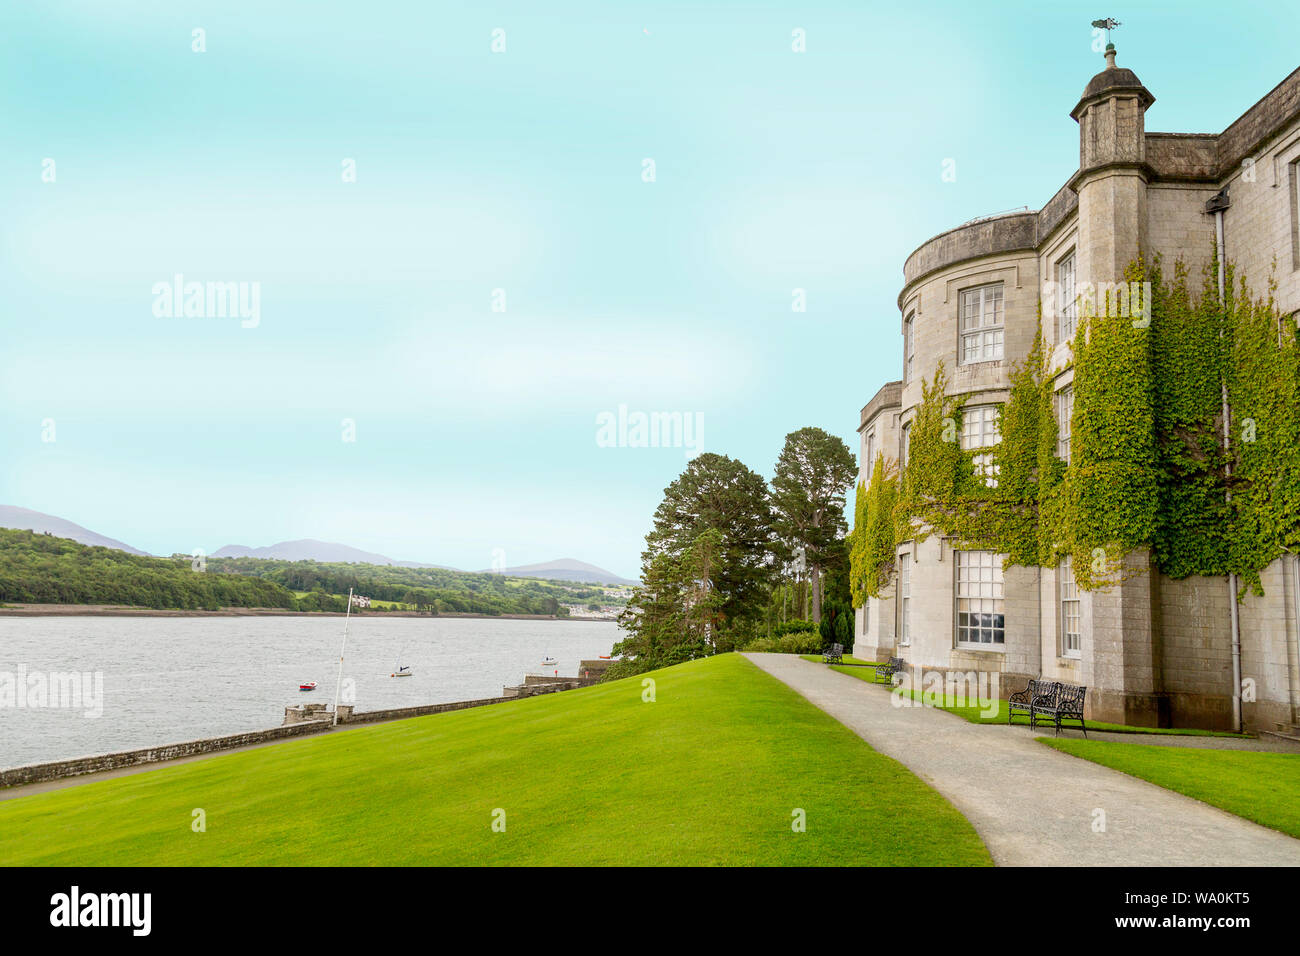 The imposing country house of Plas Newydd sits on the banks of the Menai Straits, Anglesey, Wales, UK Stock Photo